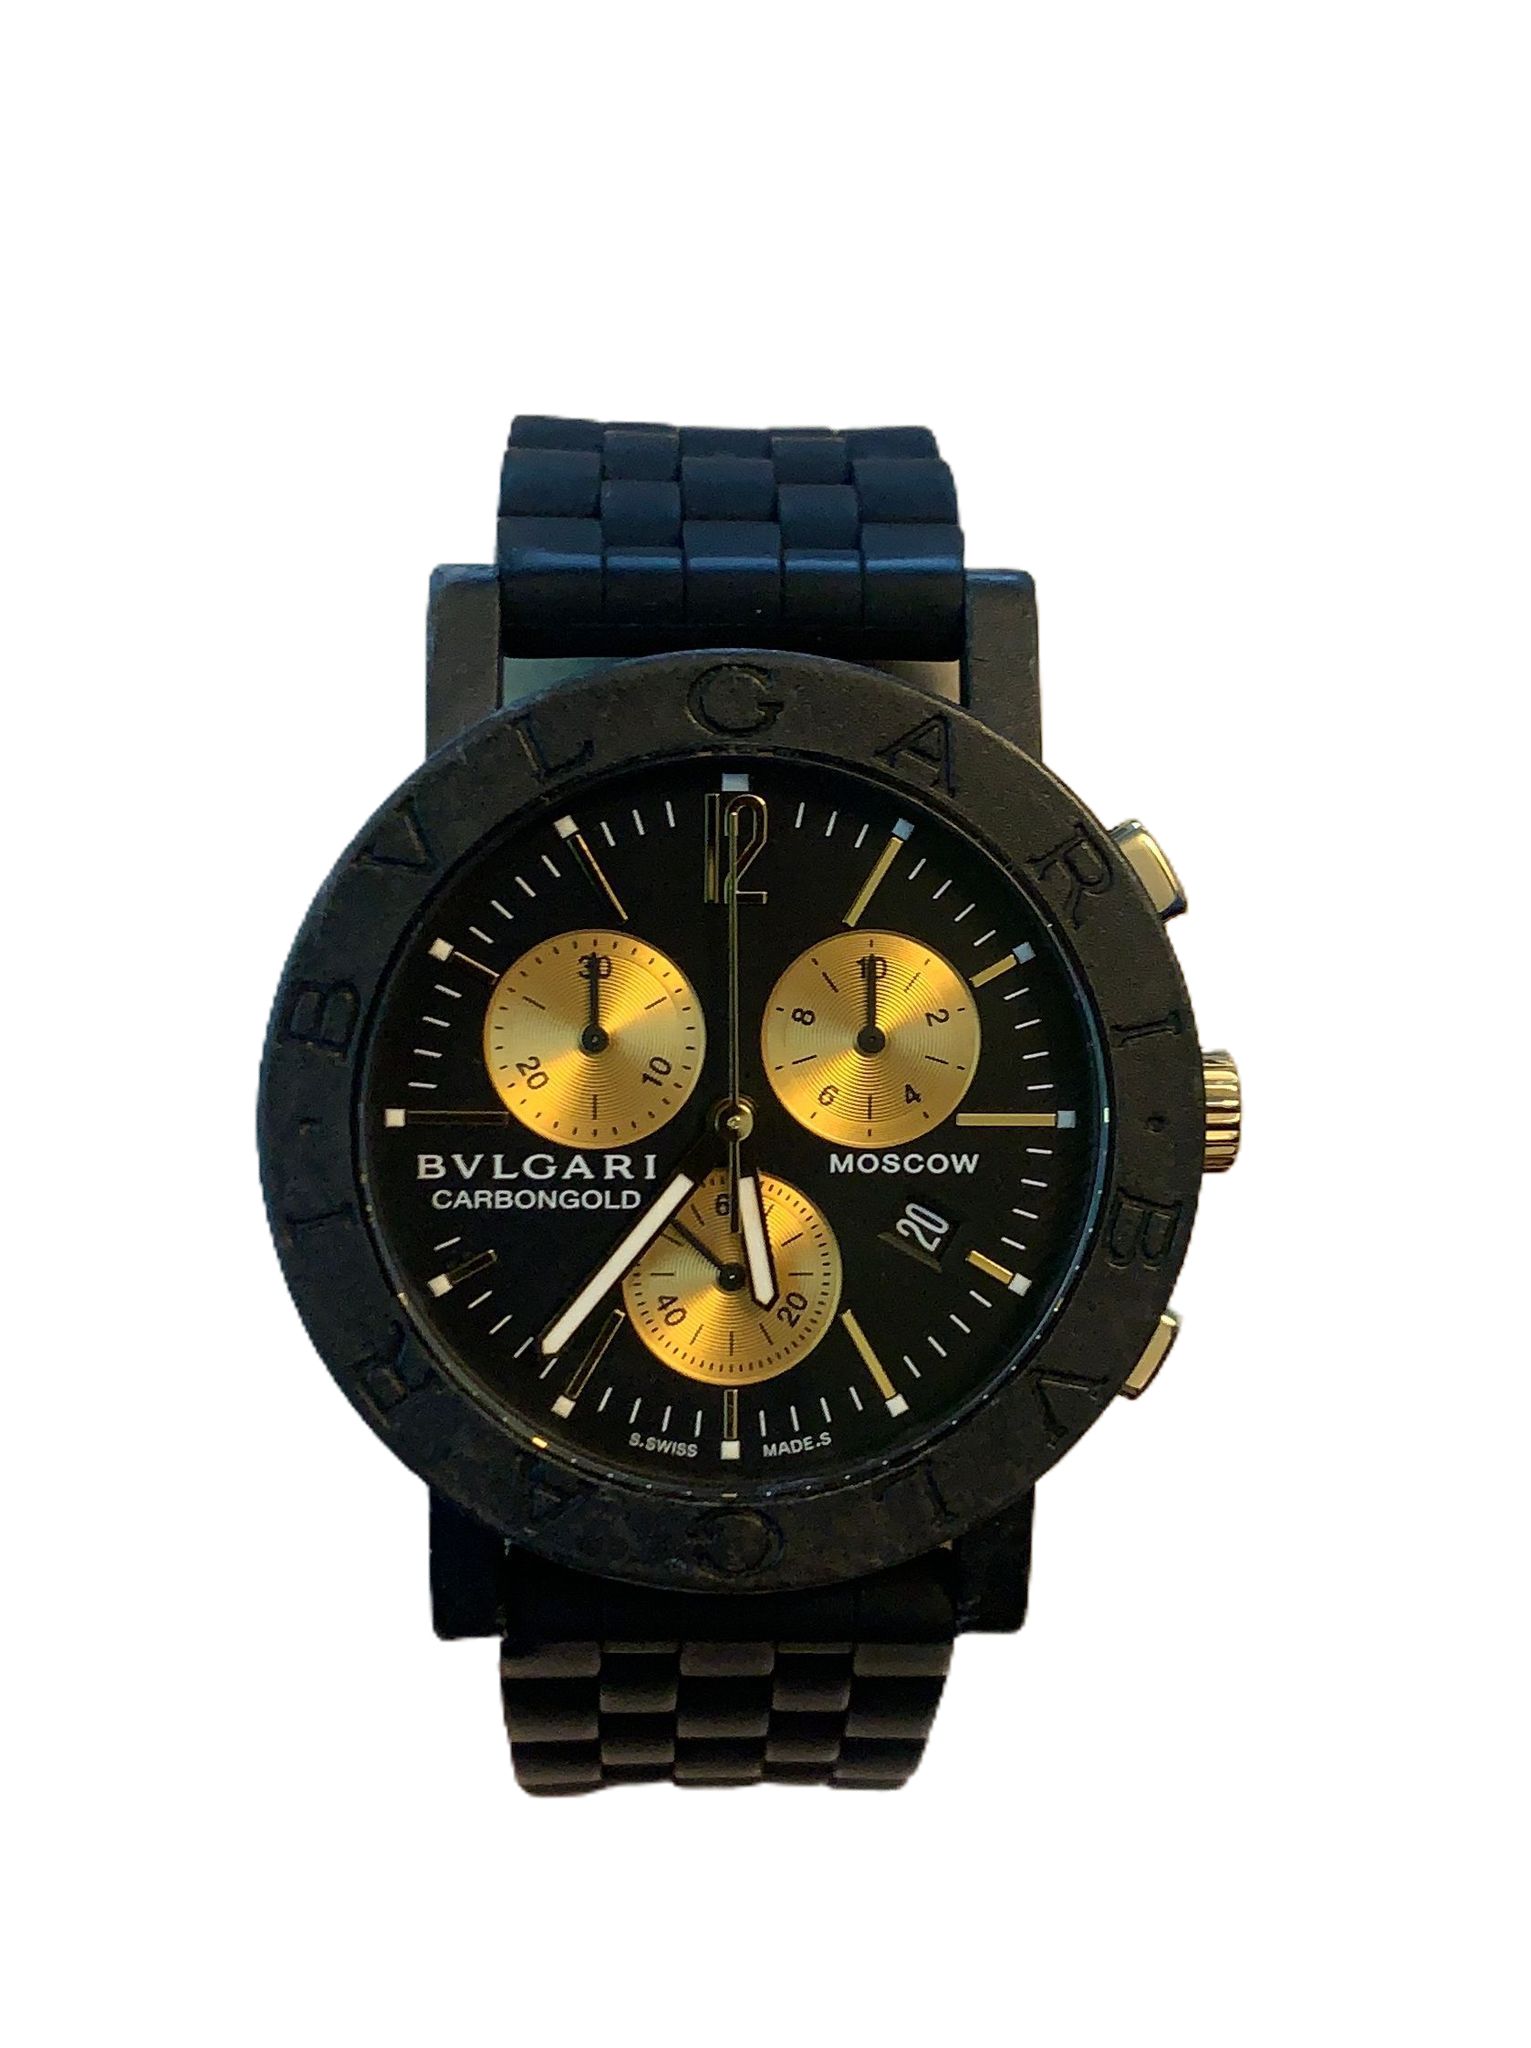 Часы Bvlgari Carbongold Moscow BB 38 CL CH